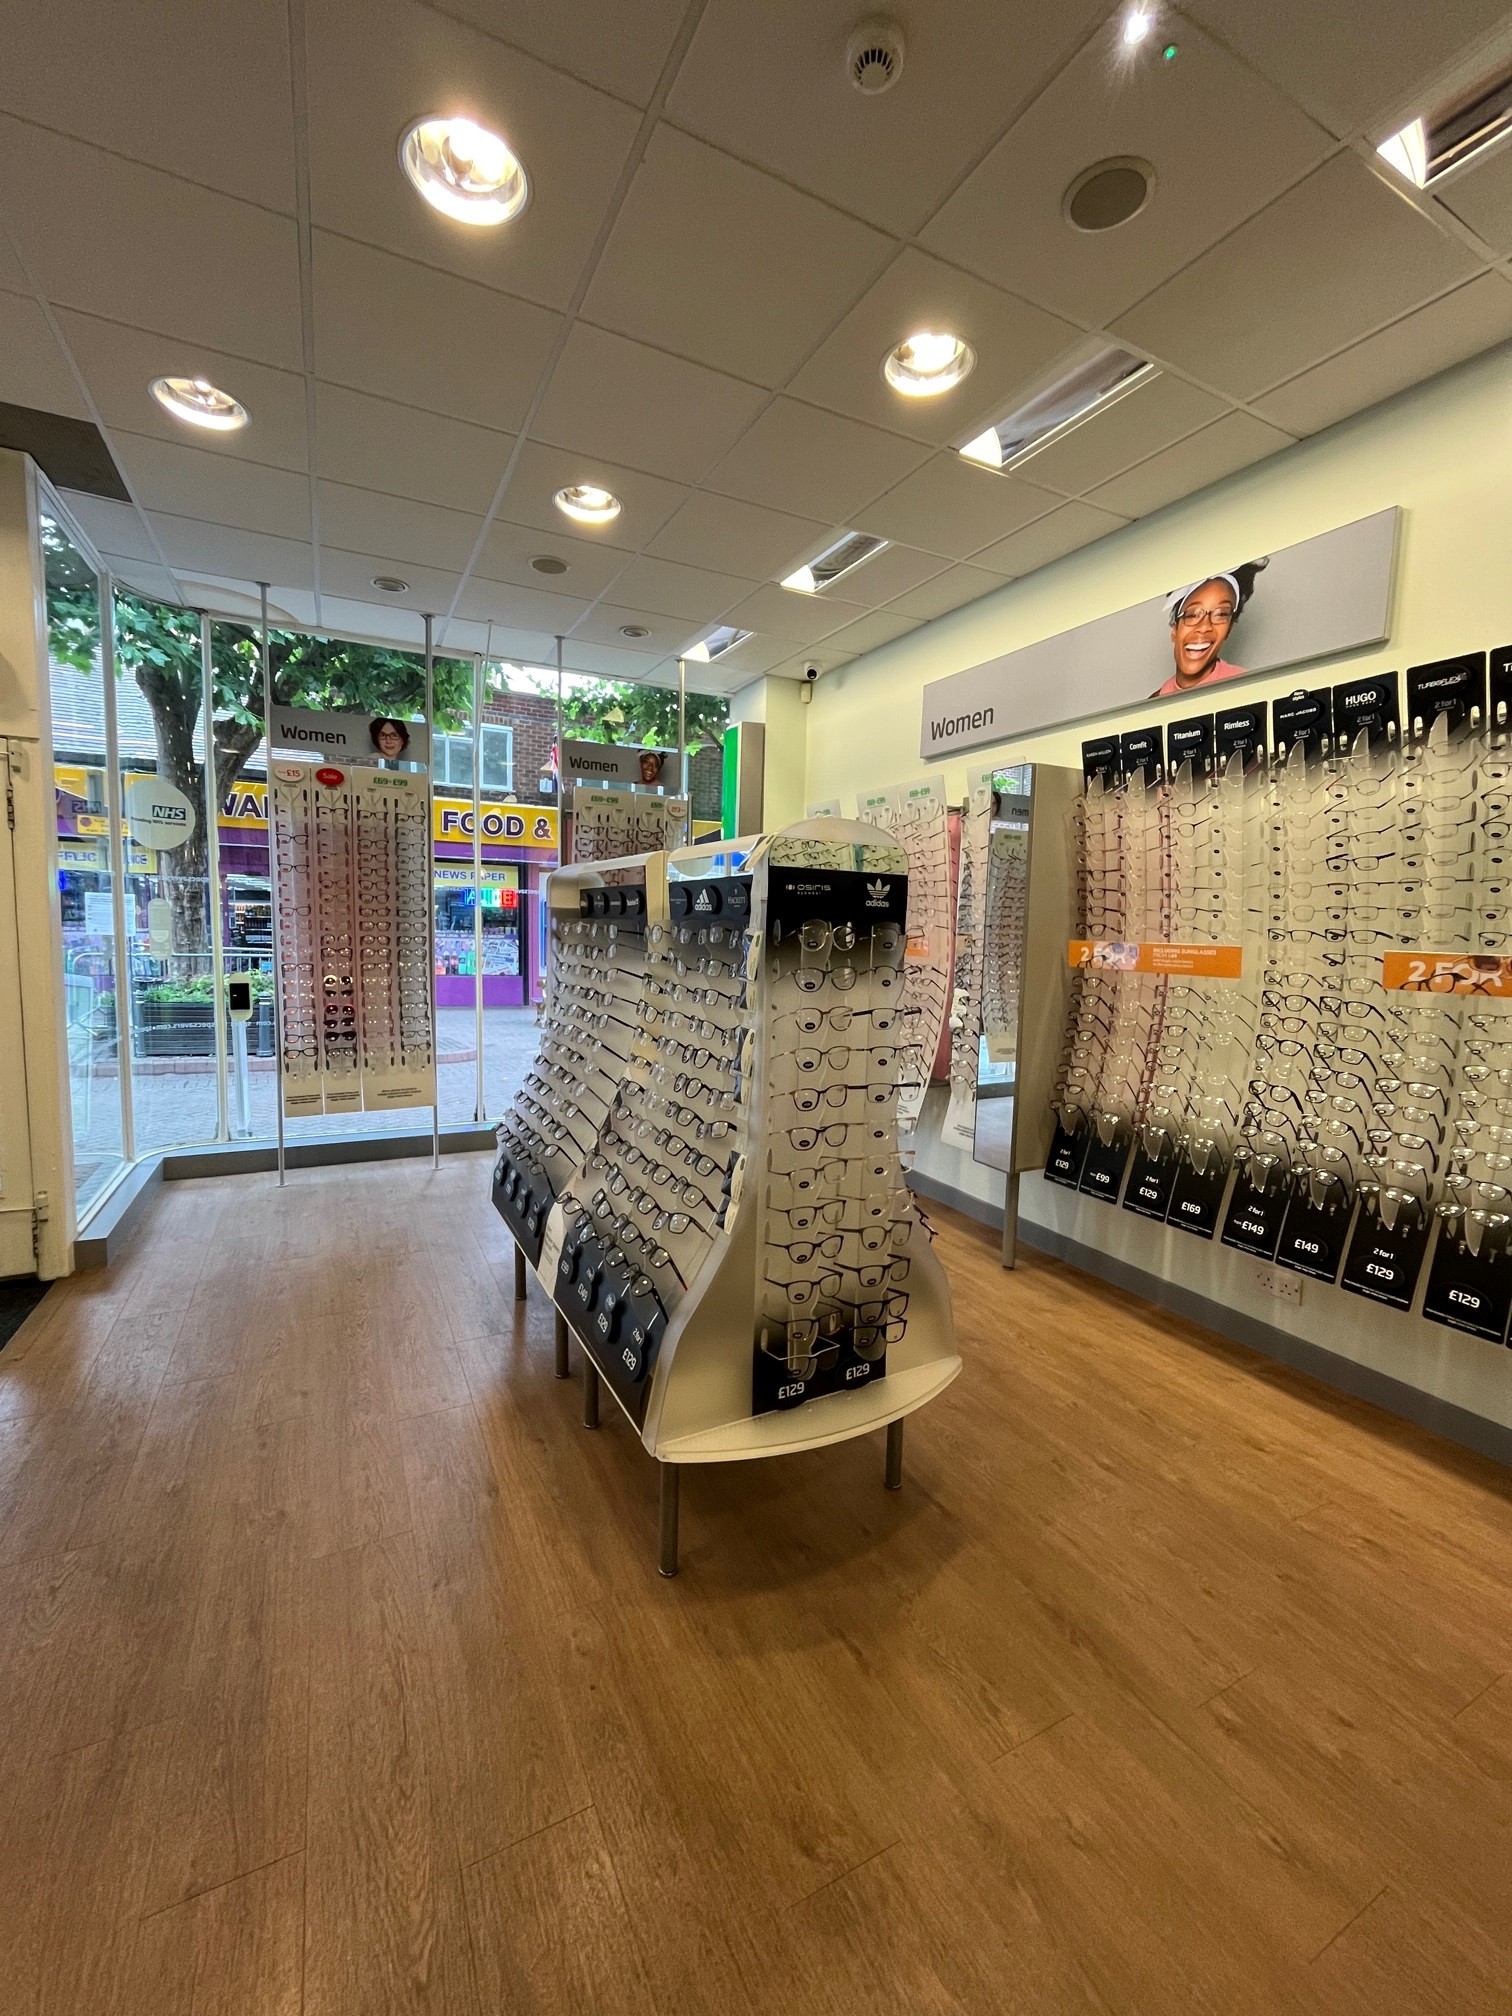 Images Specsavers Opticians and Audiologists - Swadlincote